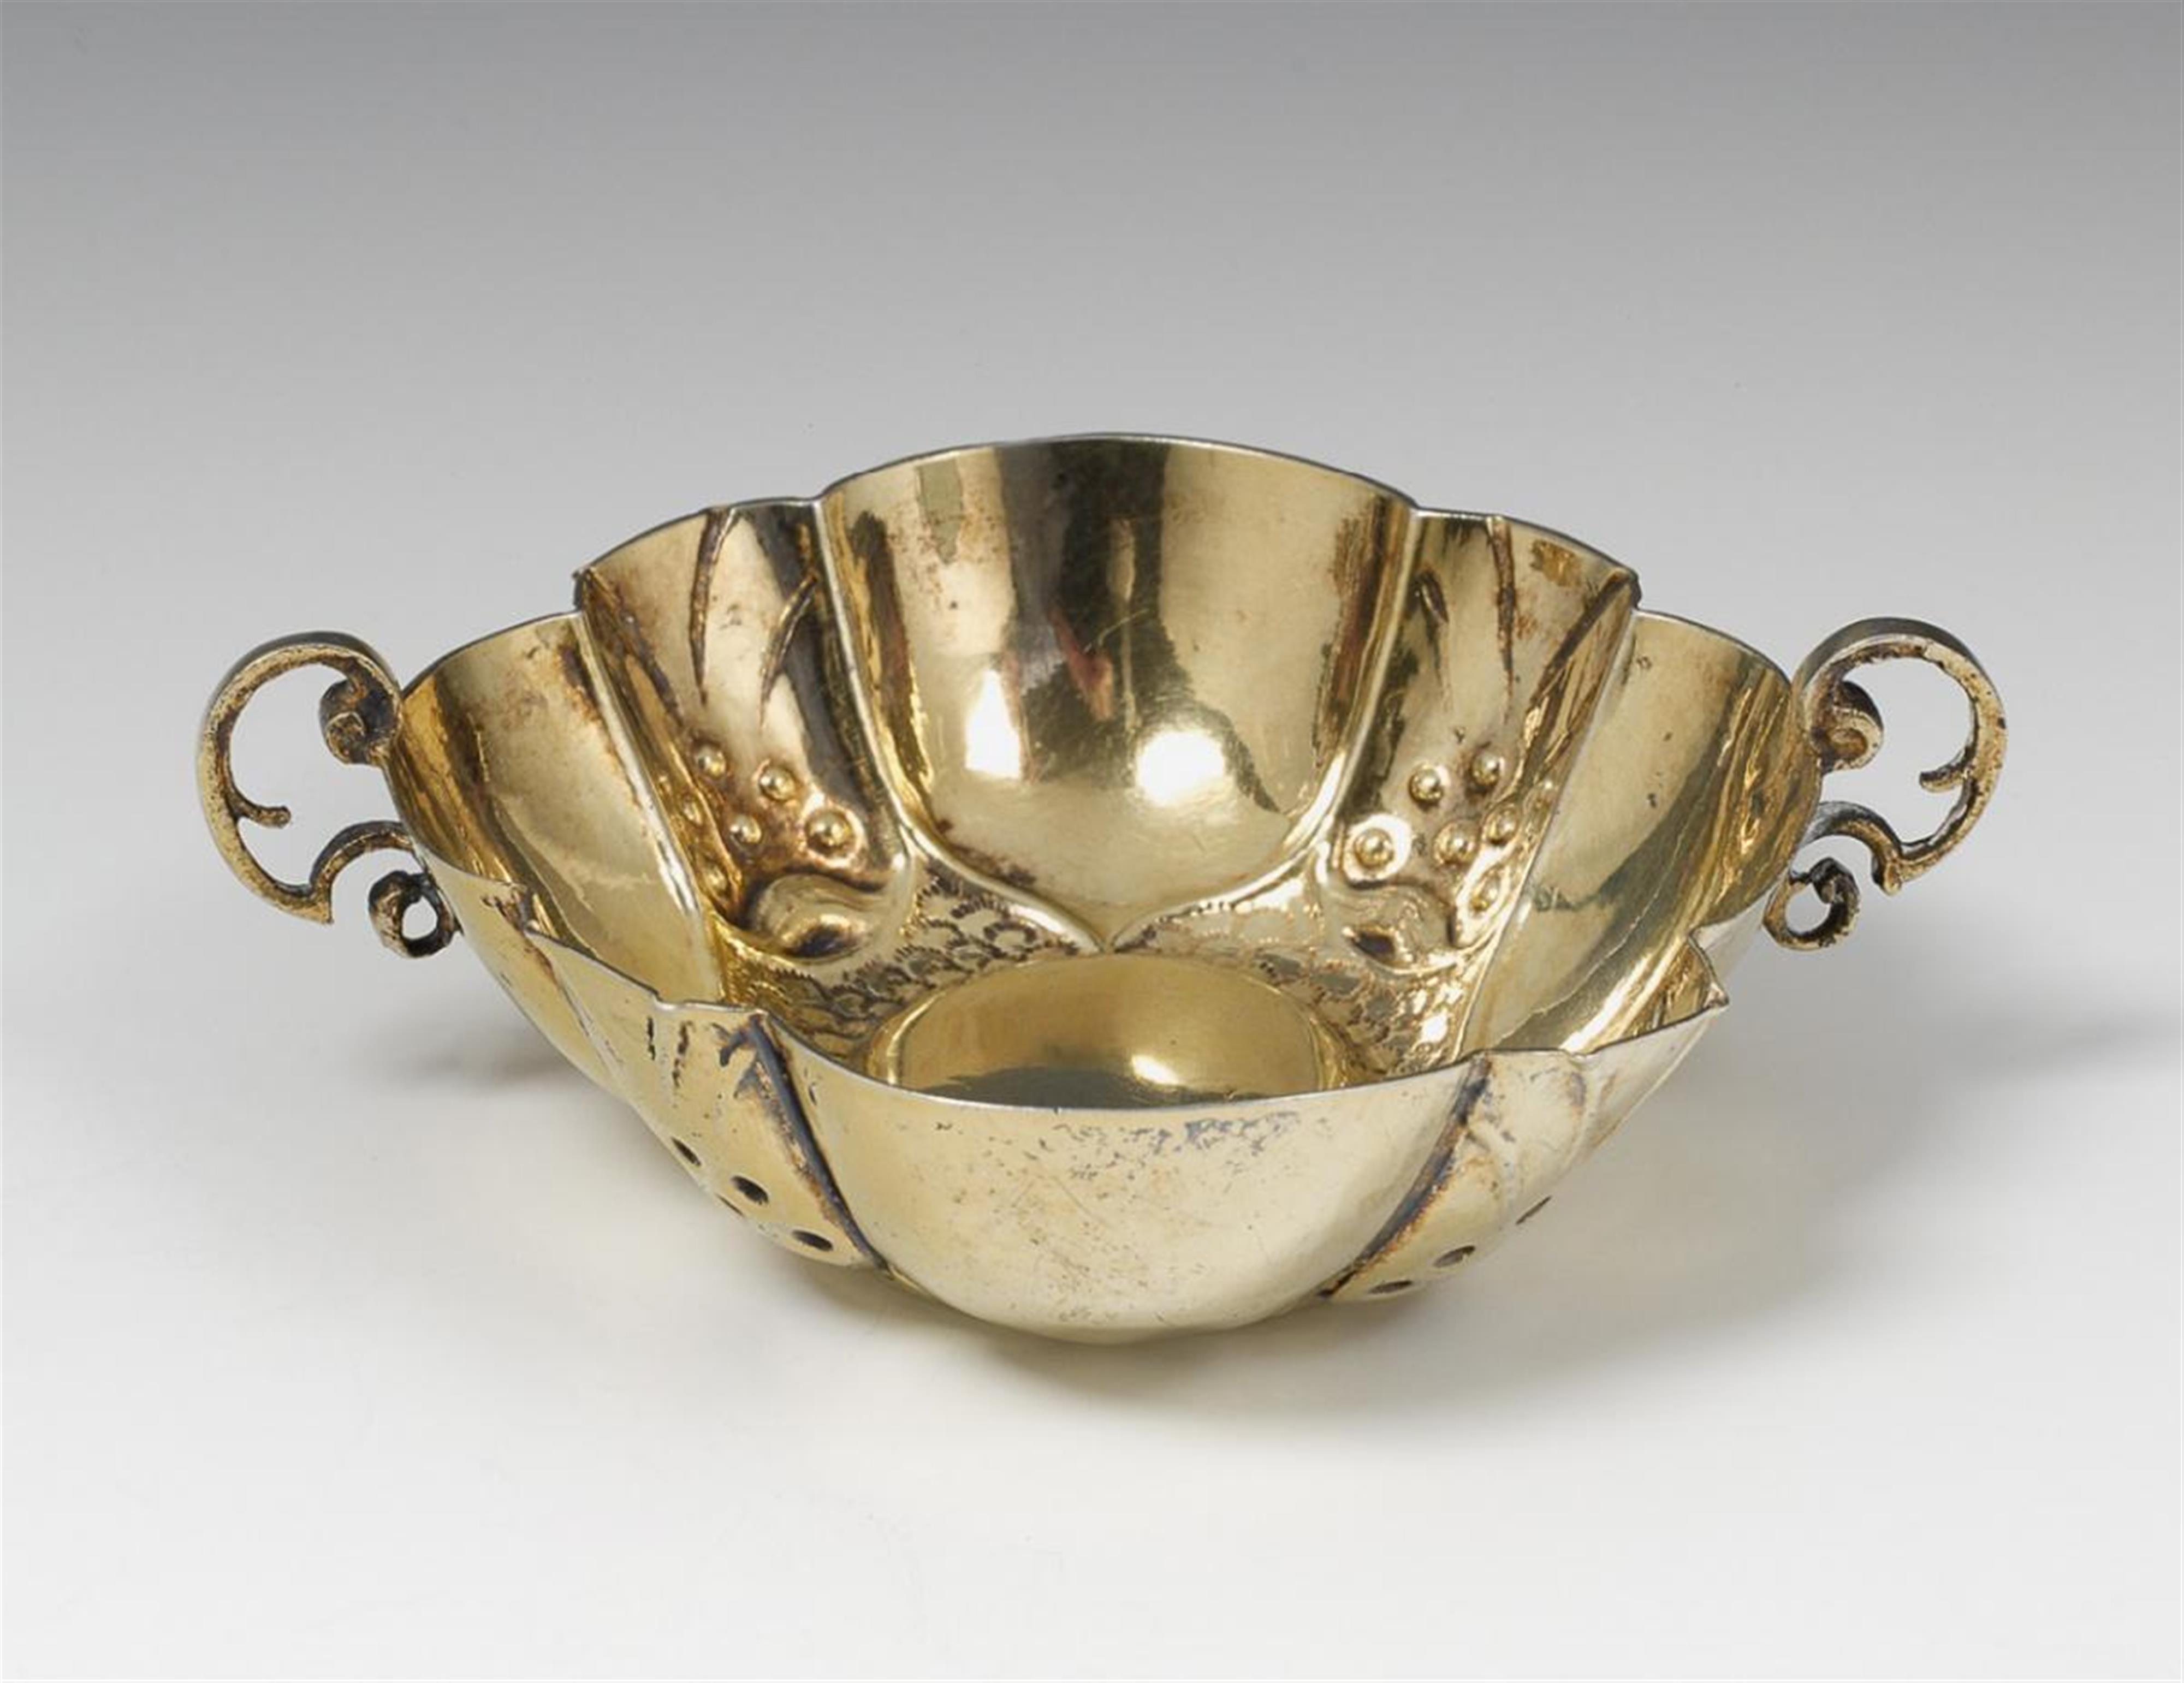 An Augsburg silver gilt brandy bowl. With a dedication dated 1650 to the underside. Indistinct maker's mark, 1649 - 50. - image-1